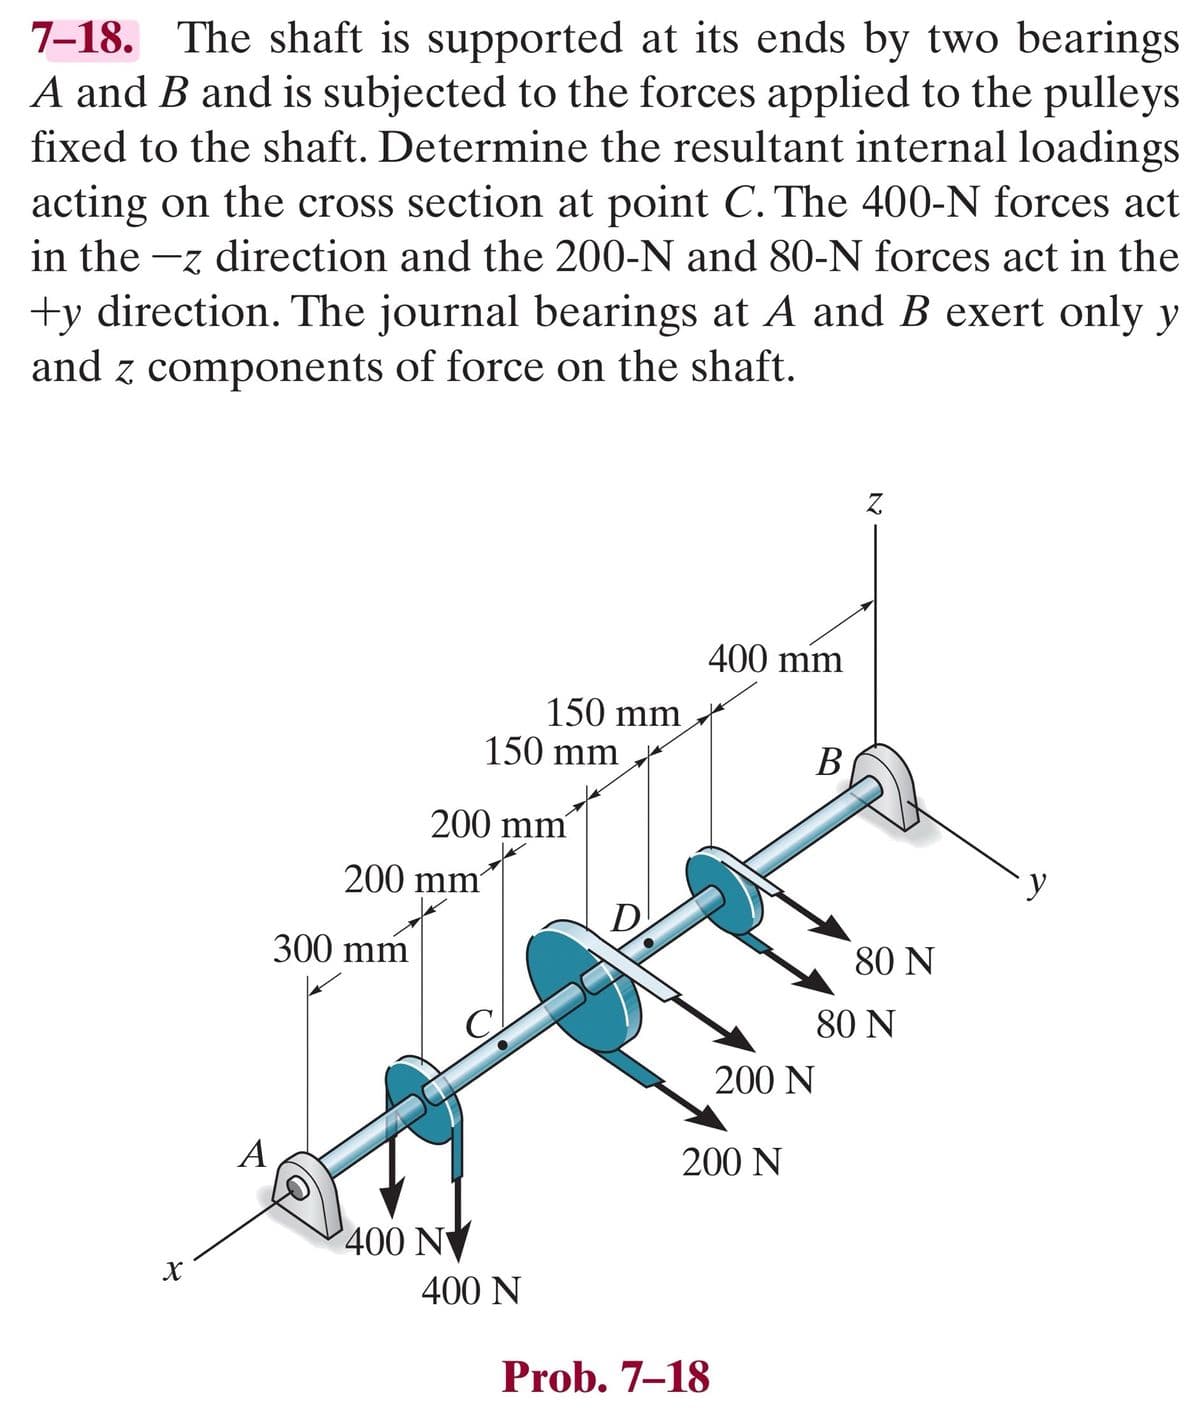 7-18. The shaft is supported at its ends by two bearings
A and B and is subjected to the forces applied to the pulleys
fixed to the shaft. Determine the resultant internal loadings
acting on the cross section at point C. The 400-N forces act
in the -z direction and the 200-N and 80-N forces act in the
+y direction. The journal bearings at A and B exert only y
and z components of force on the shaft.
X
A
200 mm
300 mm
200 mm
400 N
150 mm
150 mm
400 N
D
400 mm
200 N
Prob. 7-18
B
200 N
Z
80 N
80 N
y